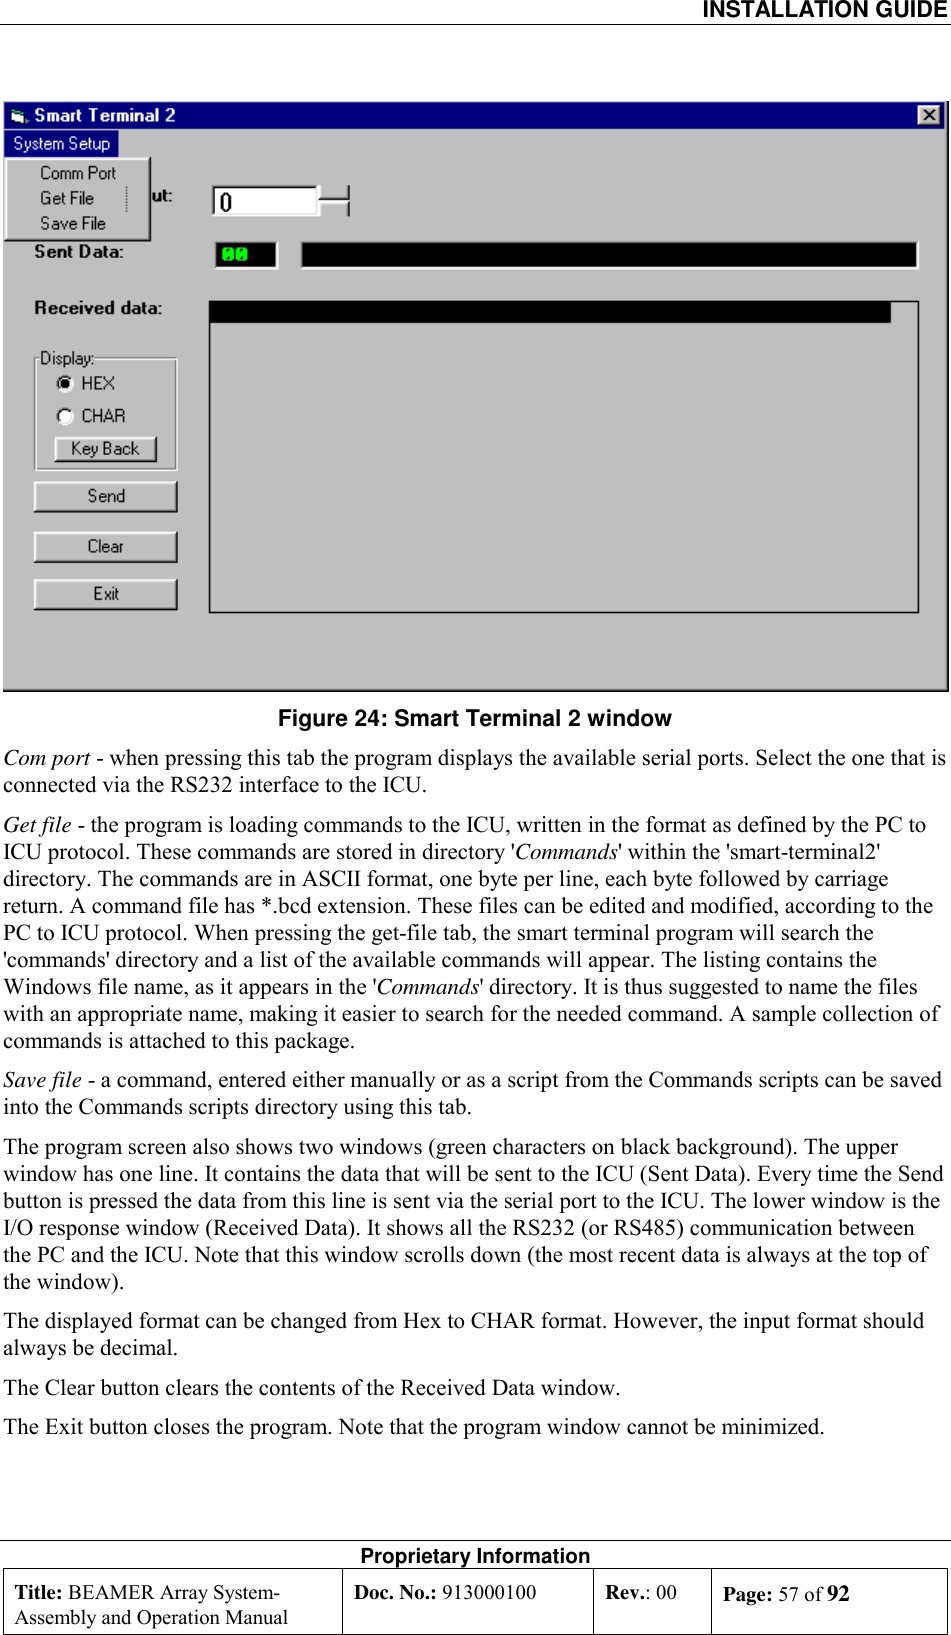  INSTALLATION GUIDE Proprietary Information Title: BEAMER Array System- Assembly and Operation Manual Doc. No.: 913000100  Rev.: 00  Page: 57 of 92   Figure 24: Smart Terminal 2 window Com port - when pressing this tab the program displays the available serial ports. Select the one that is connected via the RS232 interface to the ICU.  Get file - the program is loading commands to the ICU, written in the format as defined by the PC to ICU protocol. These commands are stored in directory &apos;Commands&apos; within the &apos;smart-terminal2&apos; directory. The commands are in ASCII format, one byte per line, each byte followed by carriage return. A command file has *.bcd extension. These files can be edited and modified, according to the PC to ICU protocol. When pressing the get-file tab, the smart terminal program will search the &apos;commands&apos; directory and a list of the available commands will appear. The listing contains the Windows file name, as it appears in the &apos;Commands&apos; directory. It is thus suggested to name the files with an appropriate name, making it easier to search for the needed command. A sample collection of commands is attached to this package. Save file - a command, entered either manually or as a script from the Commands scripts can be saved into the Commands scripts directory using this tab.   The program screen also shows two windows (green characters on black background). The upper window has one line. It contains the data that will be sent to the ICU (Sent Data). Every time the Send button is pressed the data from this line is sent via the serial port to the ICU. The lower window is the I/O response window (Received Data). It shows all the RS232 (or RS485) communication between the PC and the ICU. Note that this window scrolls down (the most recent data is always at the top of the window). The displayed format can be changed from Hex to CHAR format. However, the input format should always be decimal. The Clear button clears the contents of the Received Data window.  The Exit button closes the program. Note that the program window cannot be minimized. 